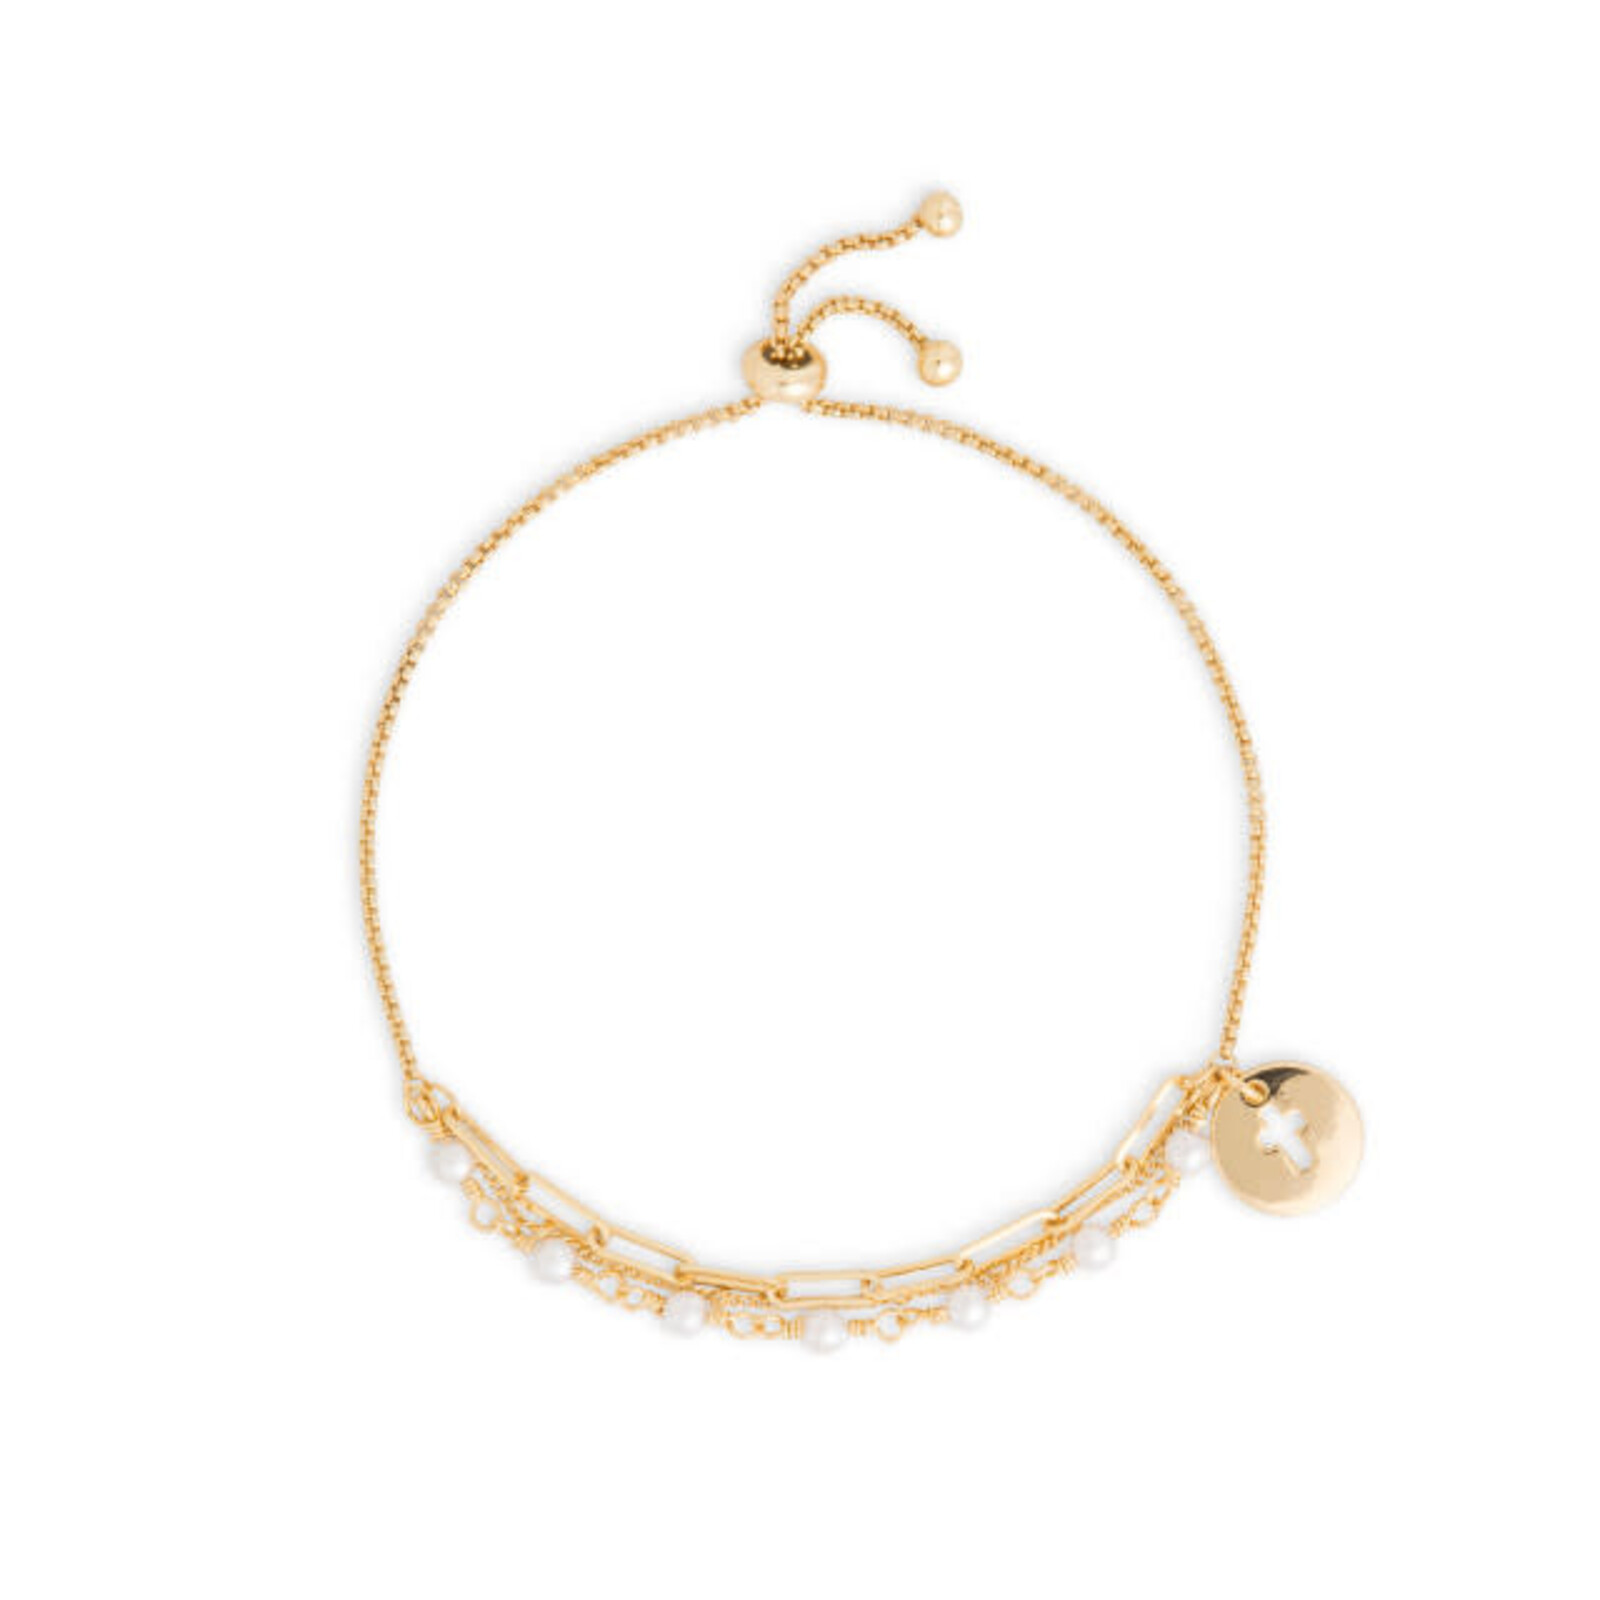 Demdaco Pearls From Within Bracelet - Gold  1004130355 loading=